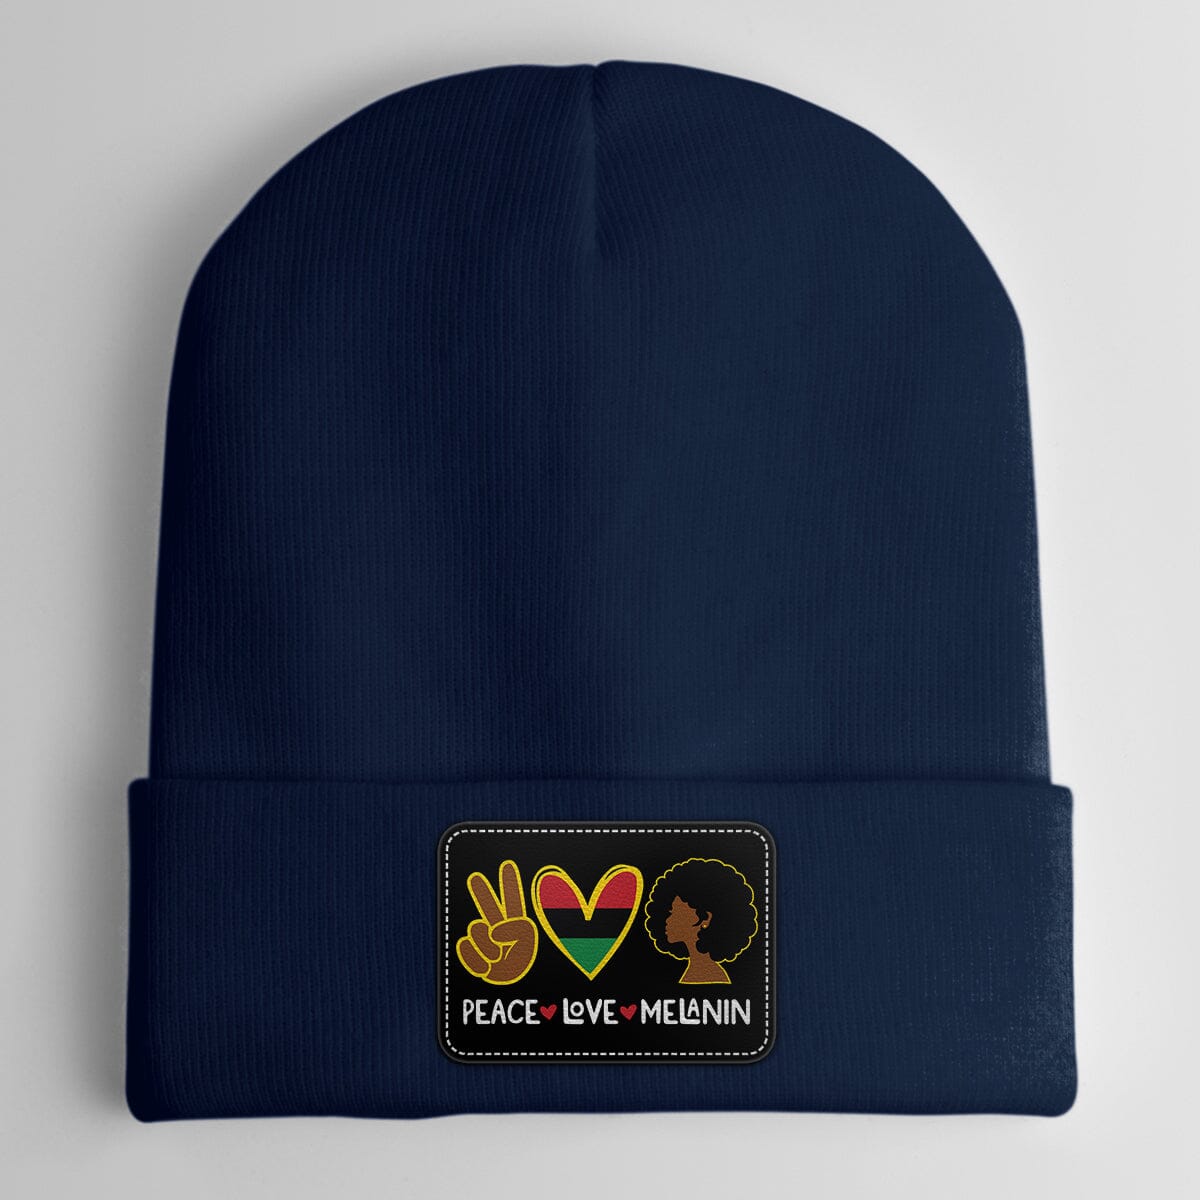 Peace Love Melanin Leather Patch Beanie Hat Leather Patch Beanie Hat CustomCat Black Patch Navy 